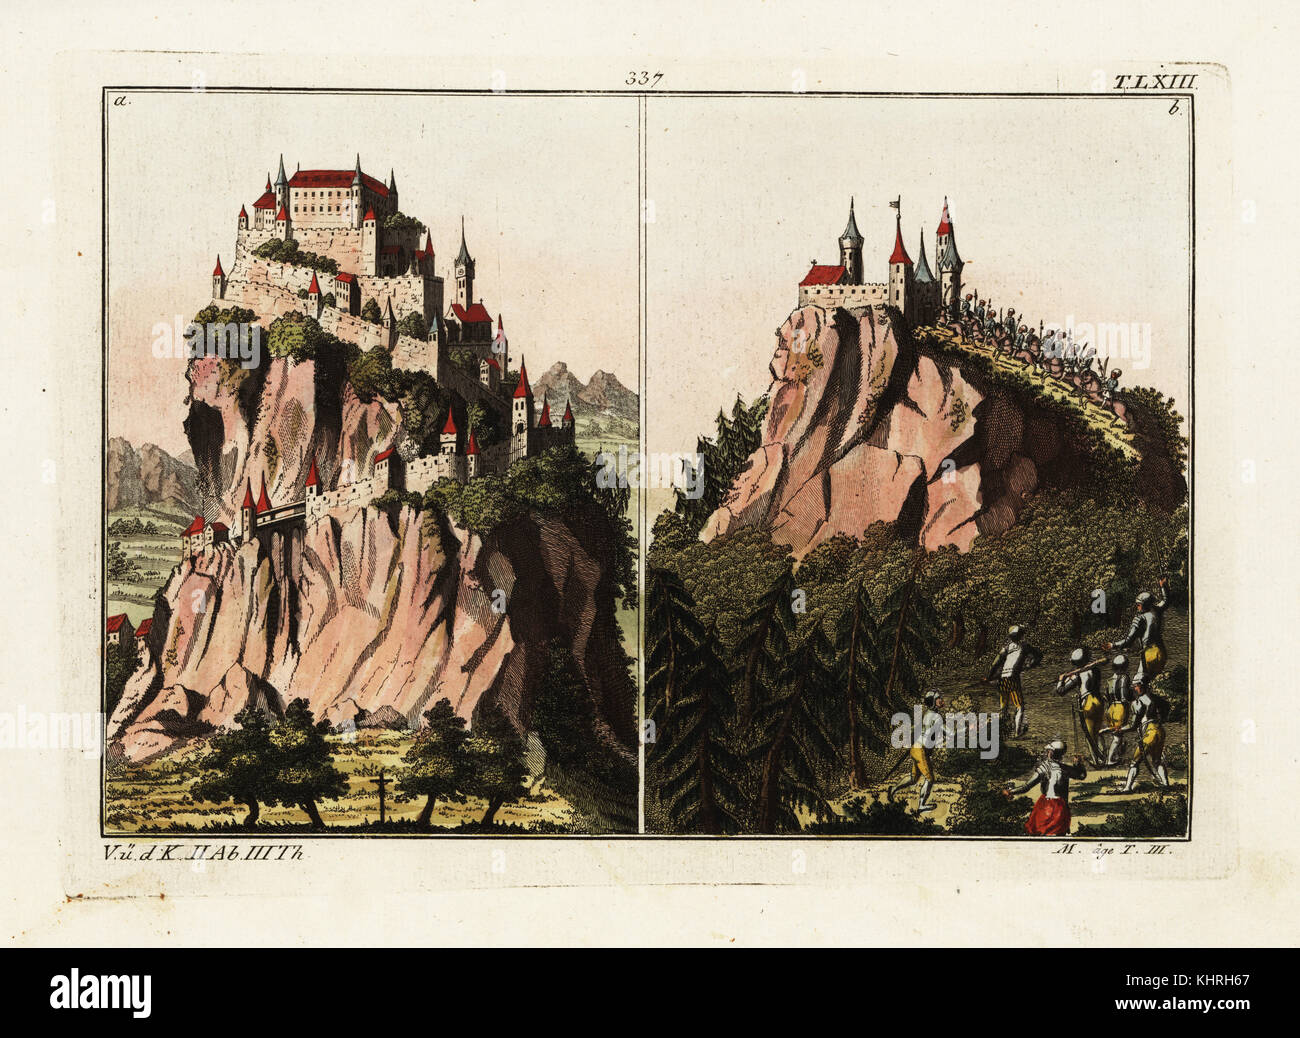 Two perfect knight's mountaintop fortress castles in Austria. (Hochosterwitz and Kreuzenstein?) Copied from Matthaeus Merian's Topographie von Osterreich, 1649. Handcoloured copperplate engraving from Robert von Spalart's Historical Picture of the Costumes of the Principal People of Antiquity and of the Middle Ages, Chez Collignon, Metz, 1810. Stock Photo